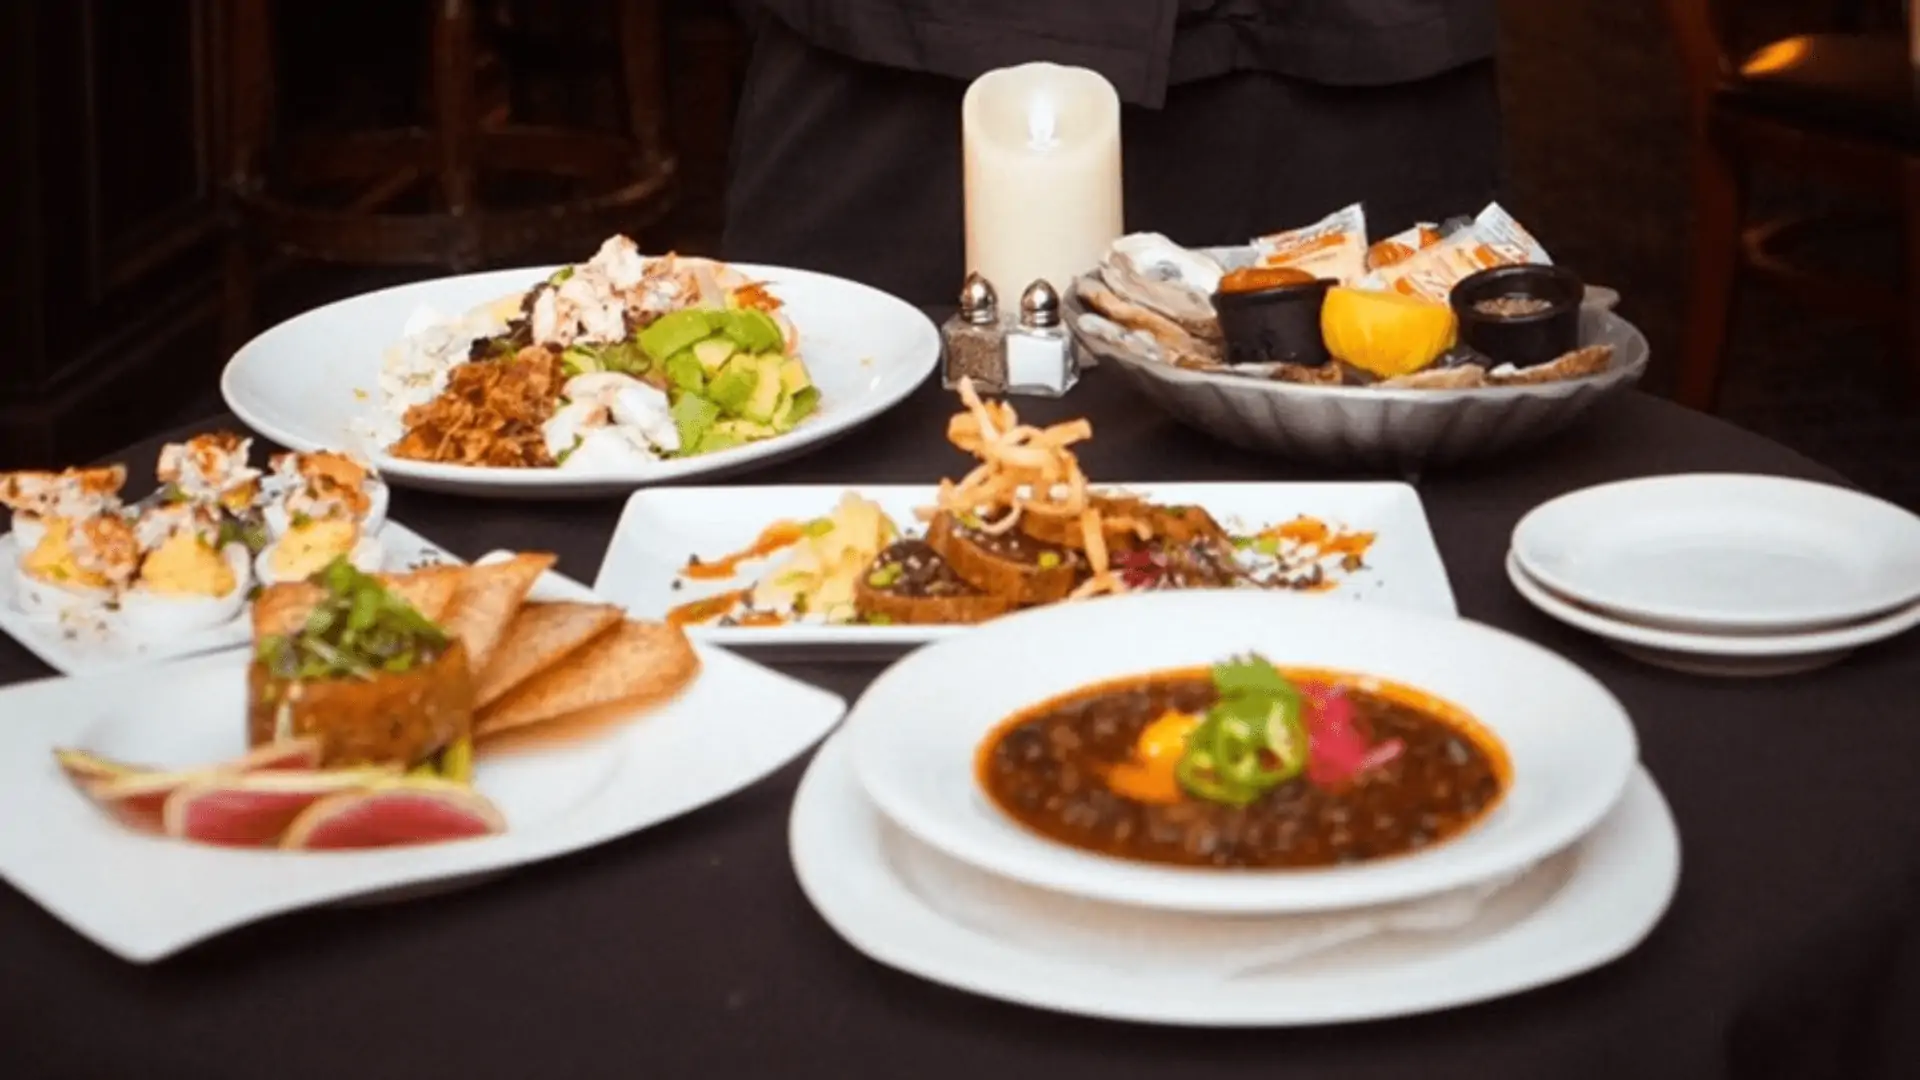 An array of dishes on a table